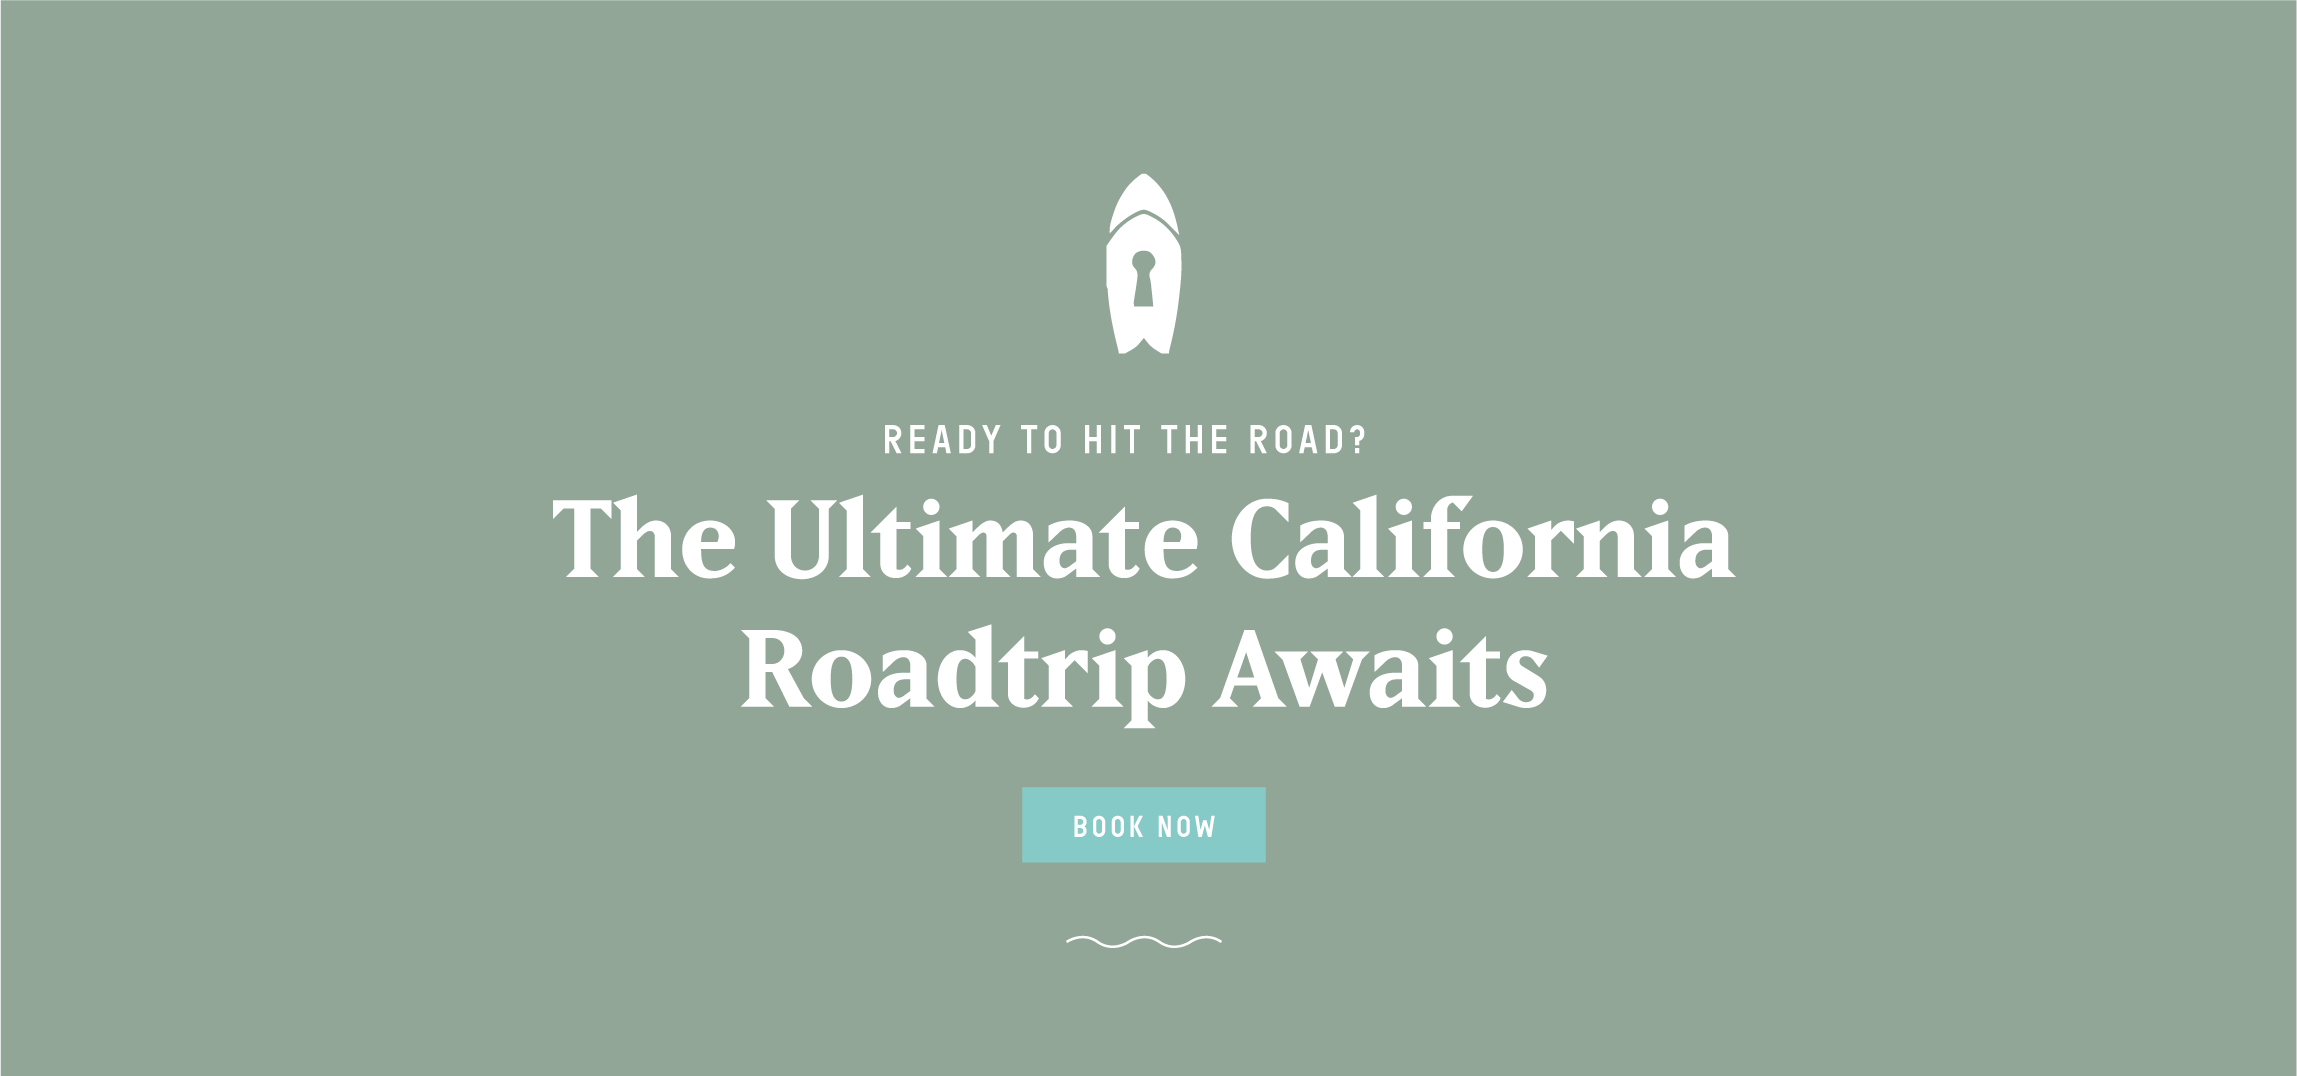 Ready to hit the road? The ultimate California road trip awaits.